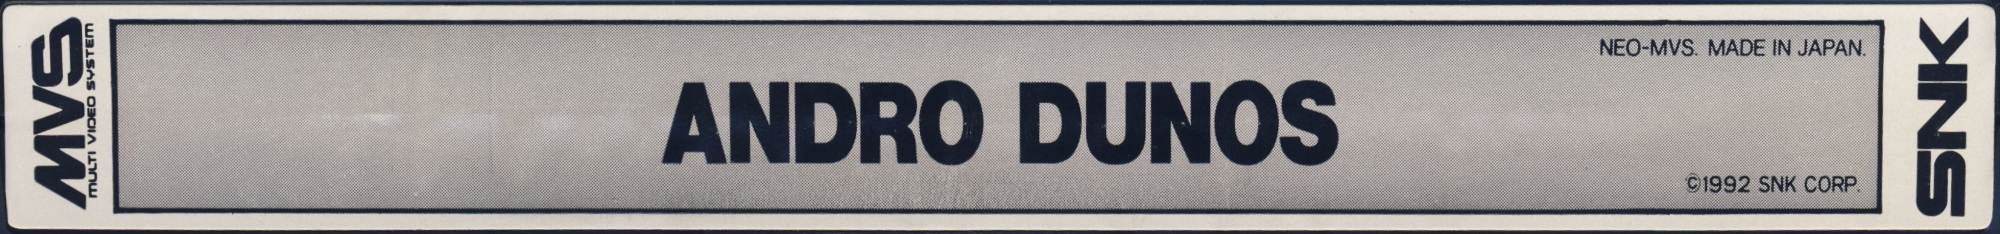 Andro dunos us label.jpg